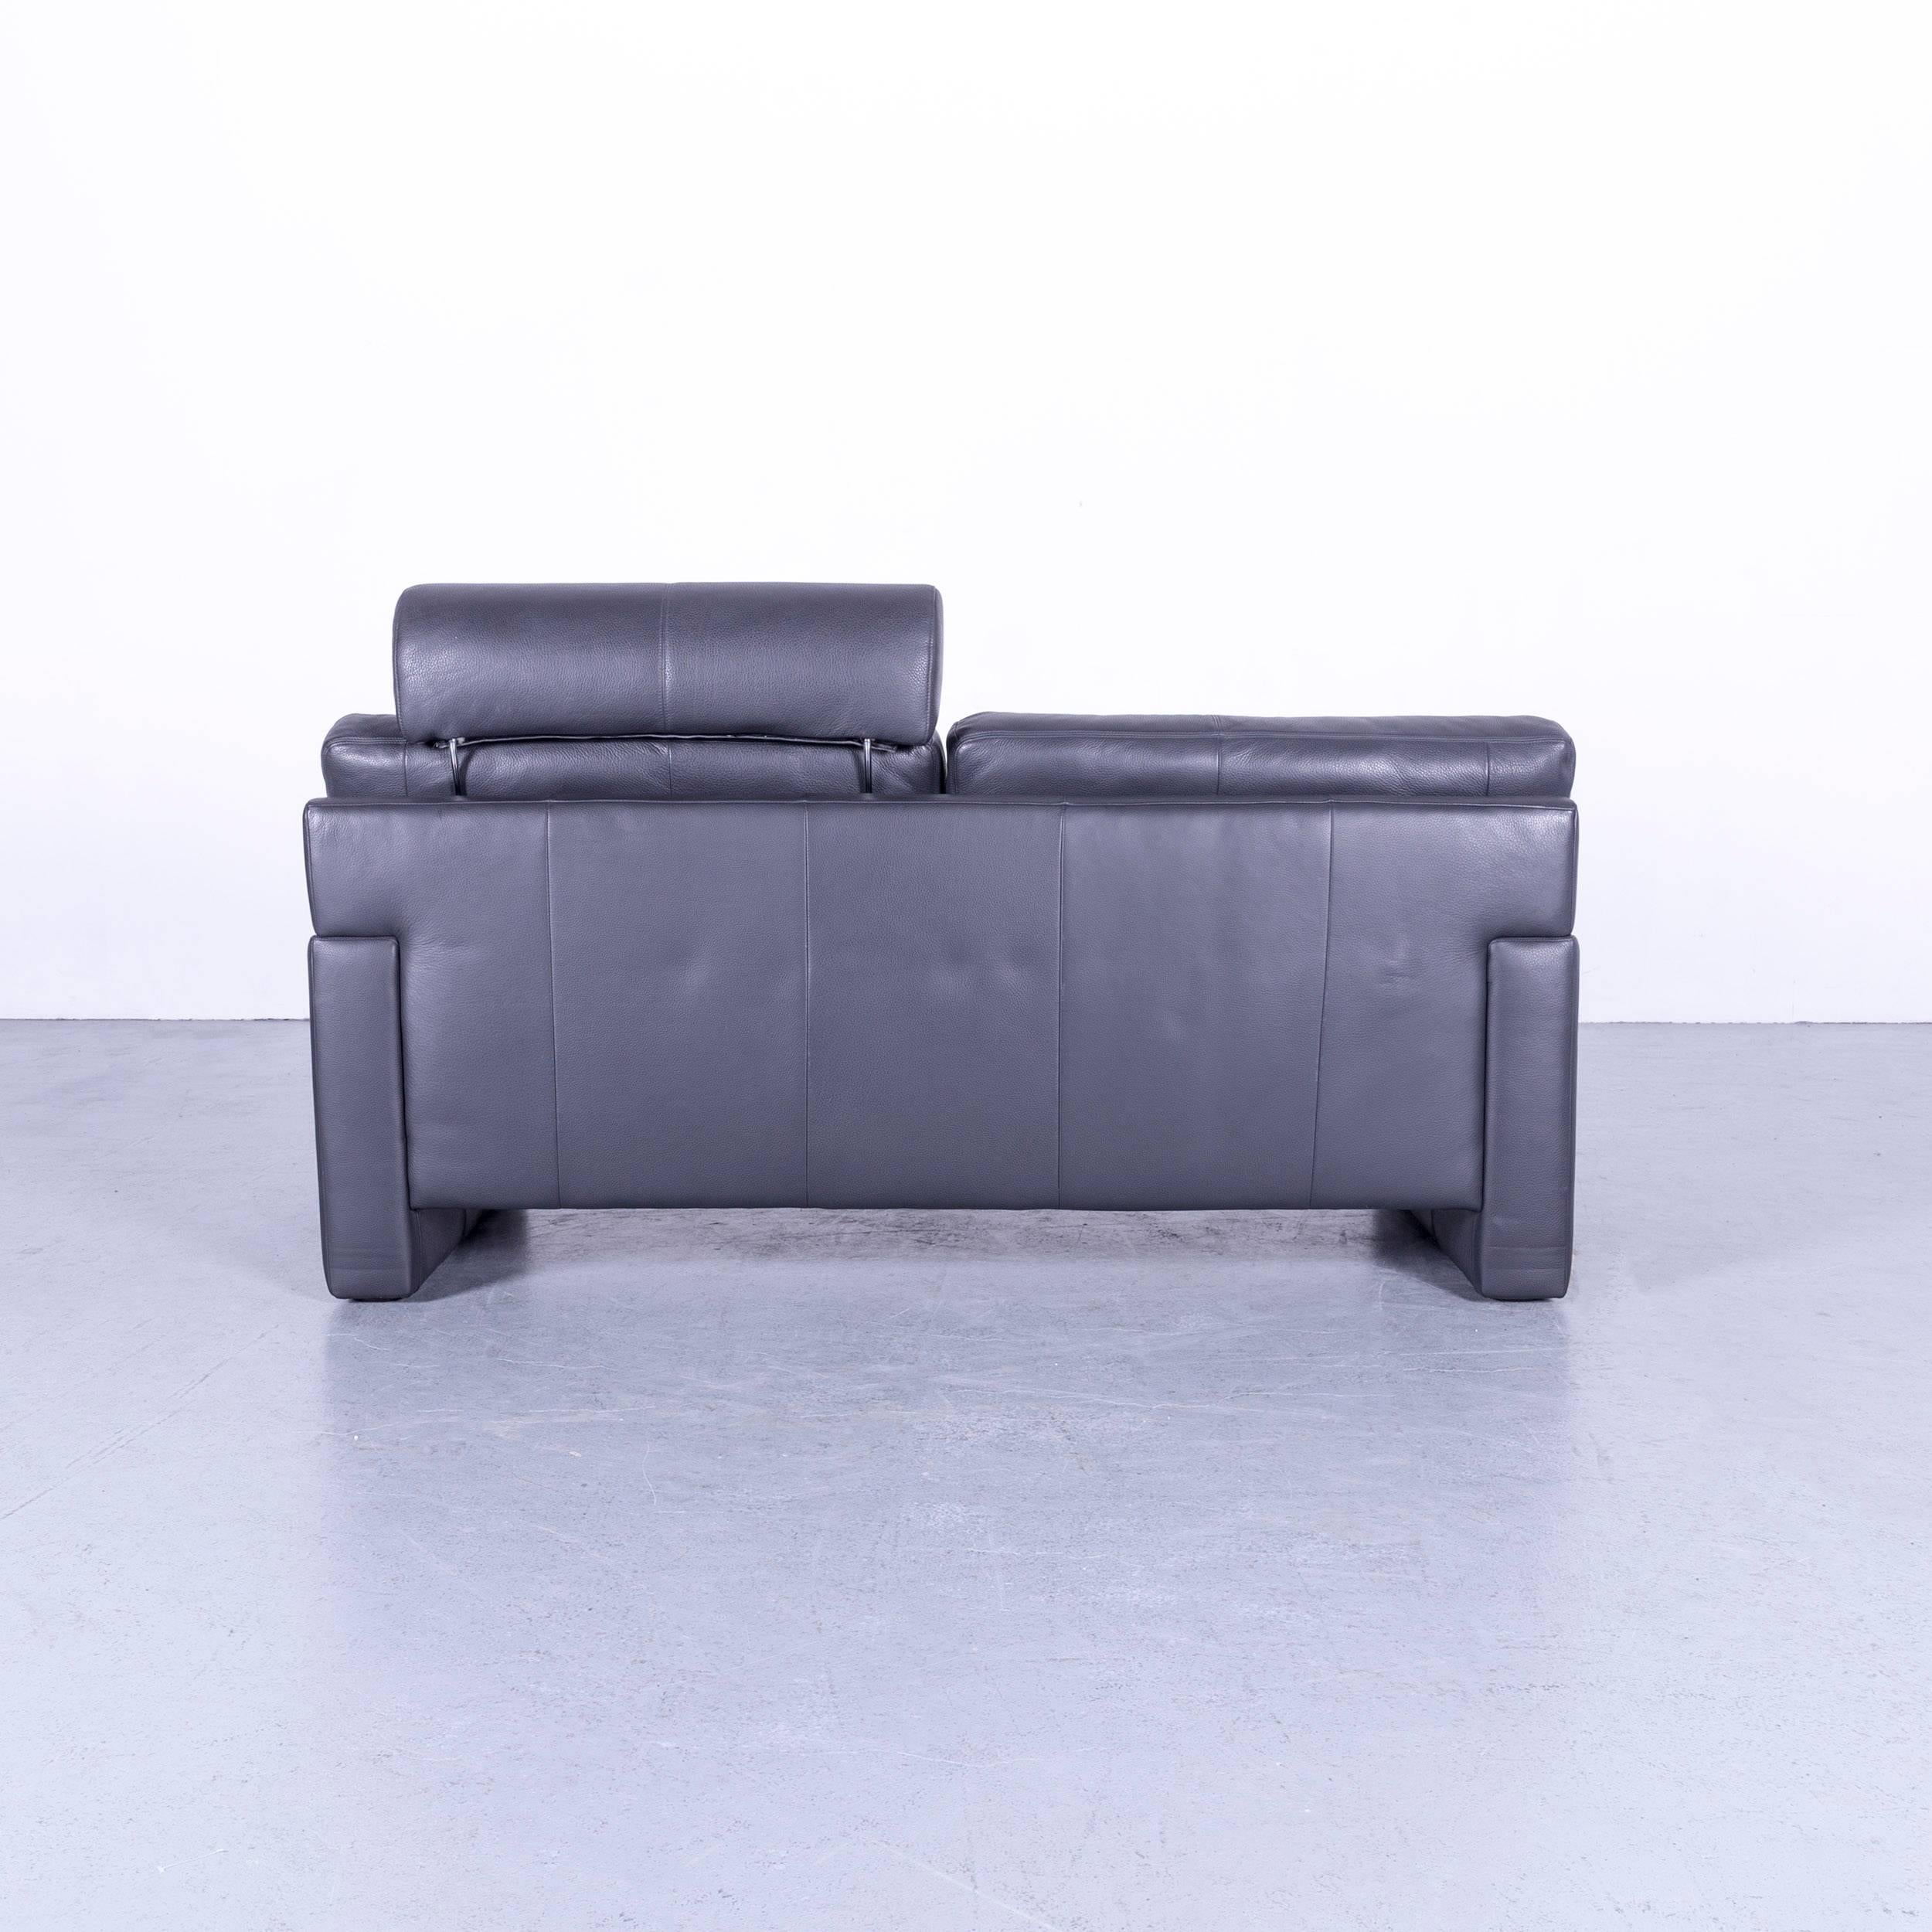 Erpo CL 300 Leather Sofa Grey Two-Seat Couch For Sale 1